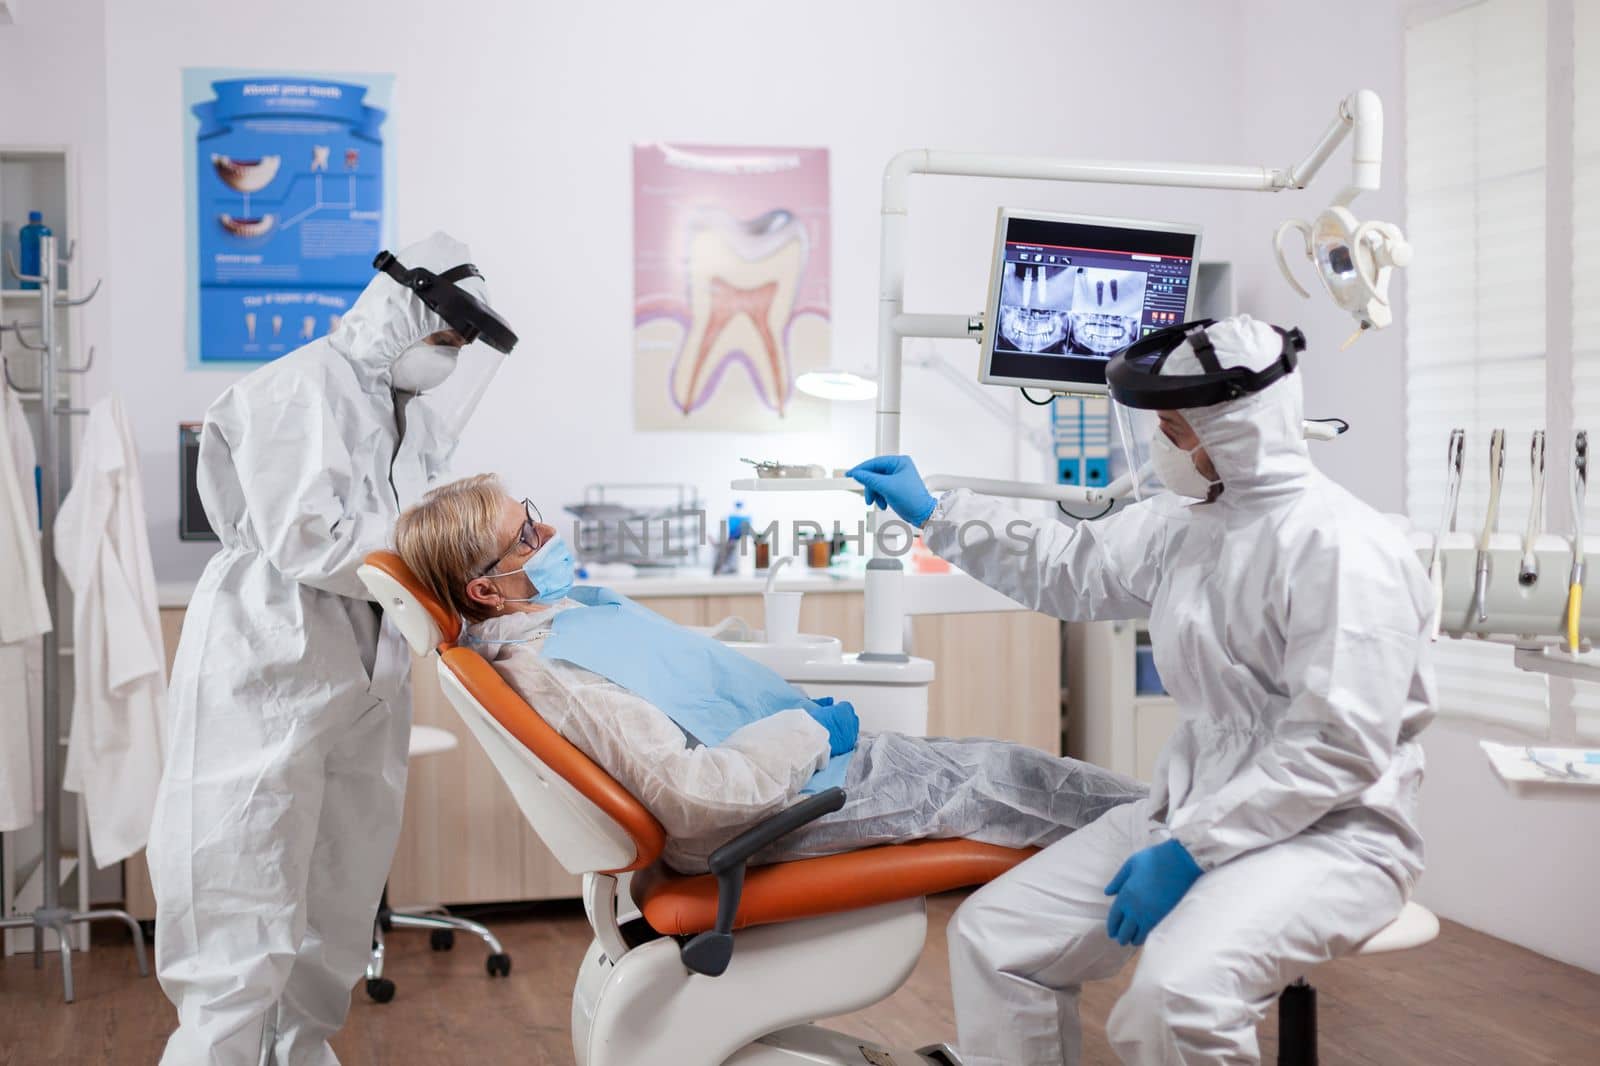 Dentist wearing equipment agasint coronavirus dicussing about teeth hygiene with senior patient. Elderly woman in protective uniform during medical examination in dental clinic.